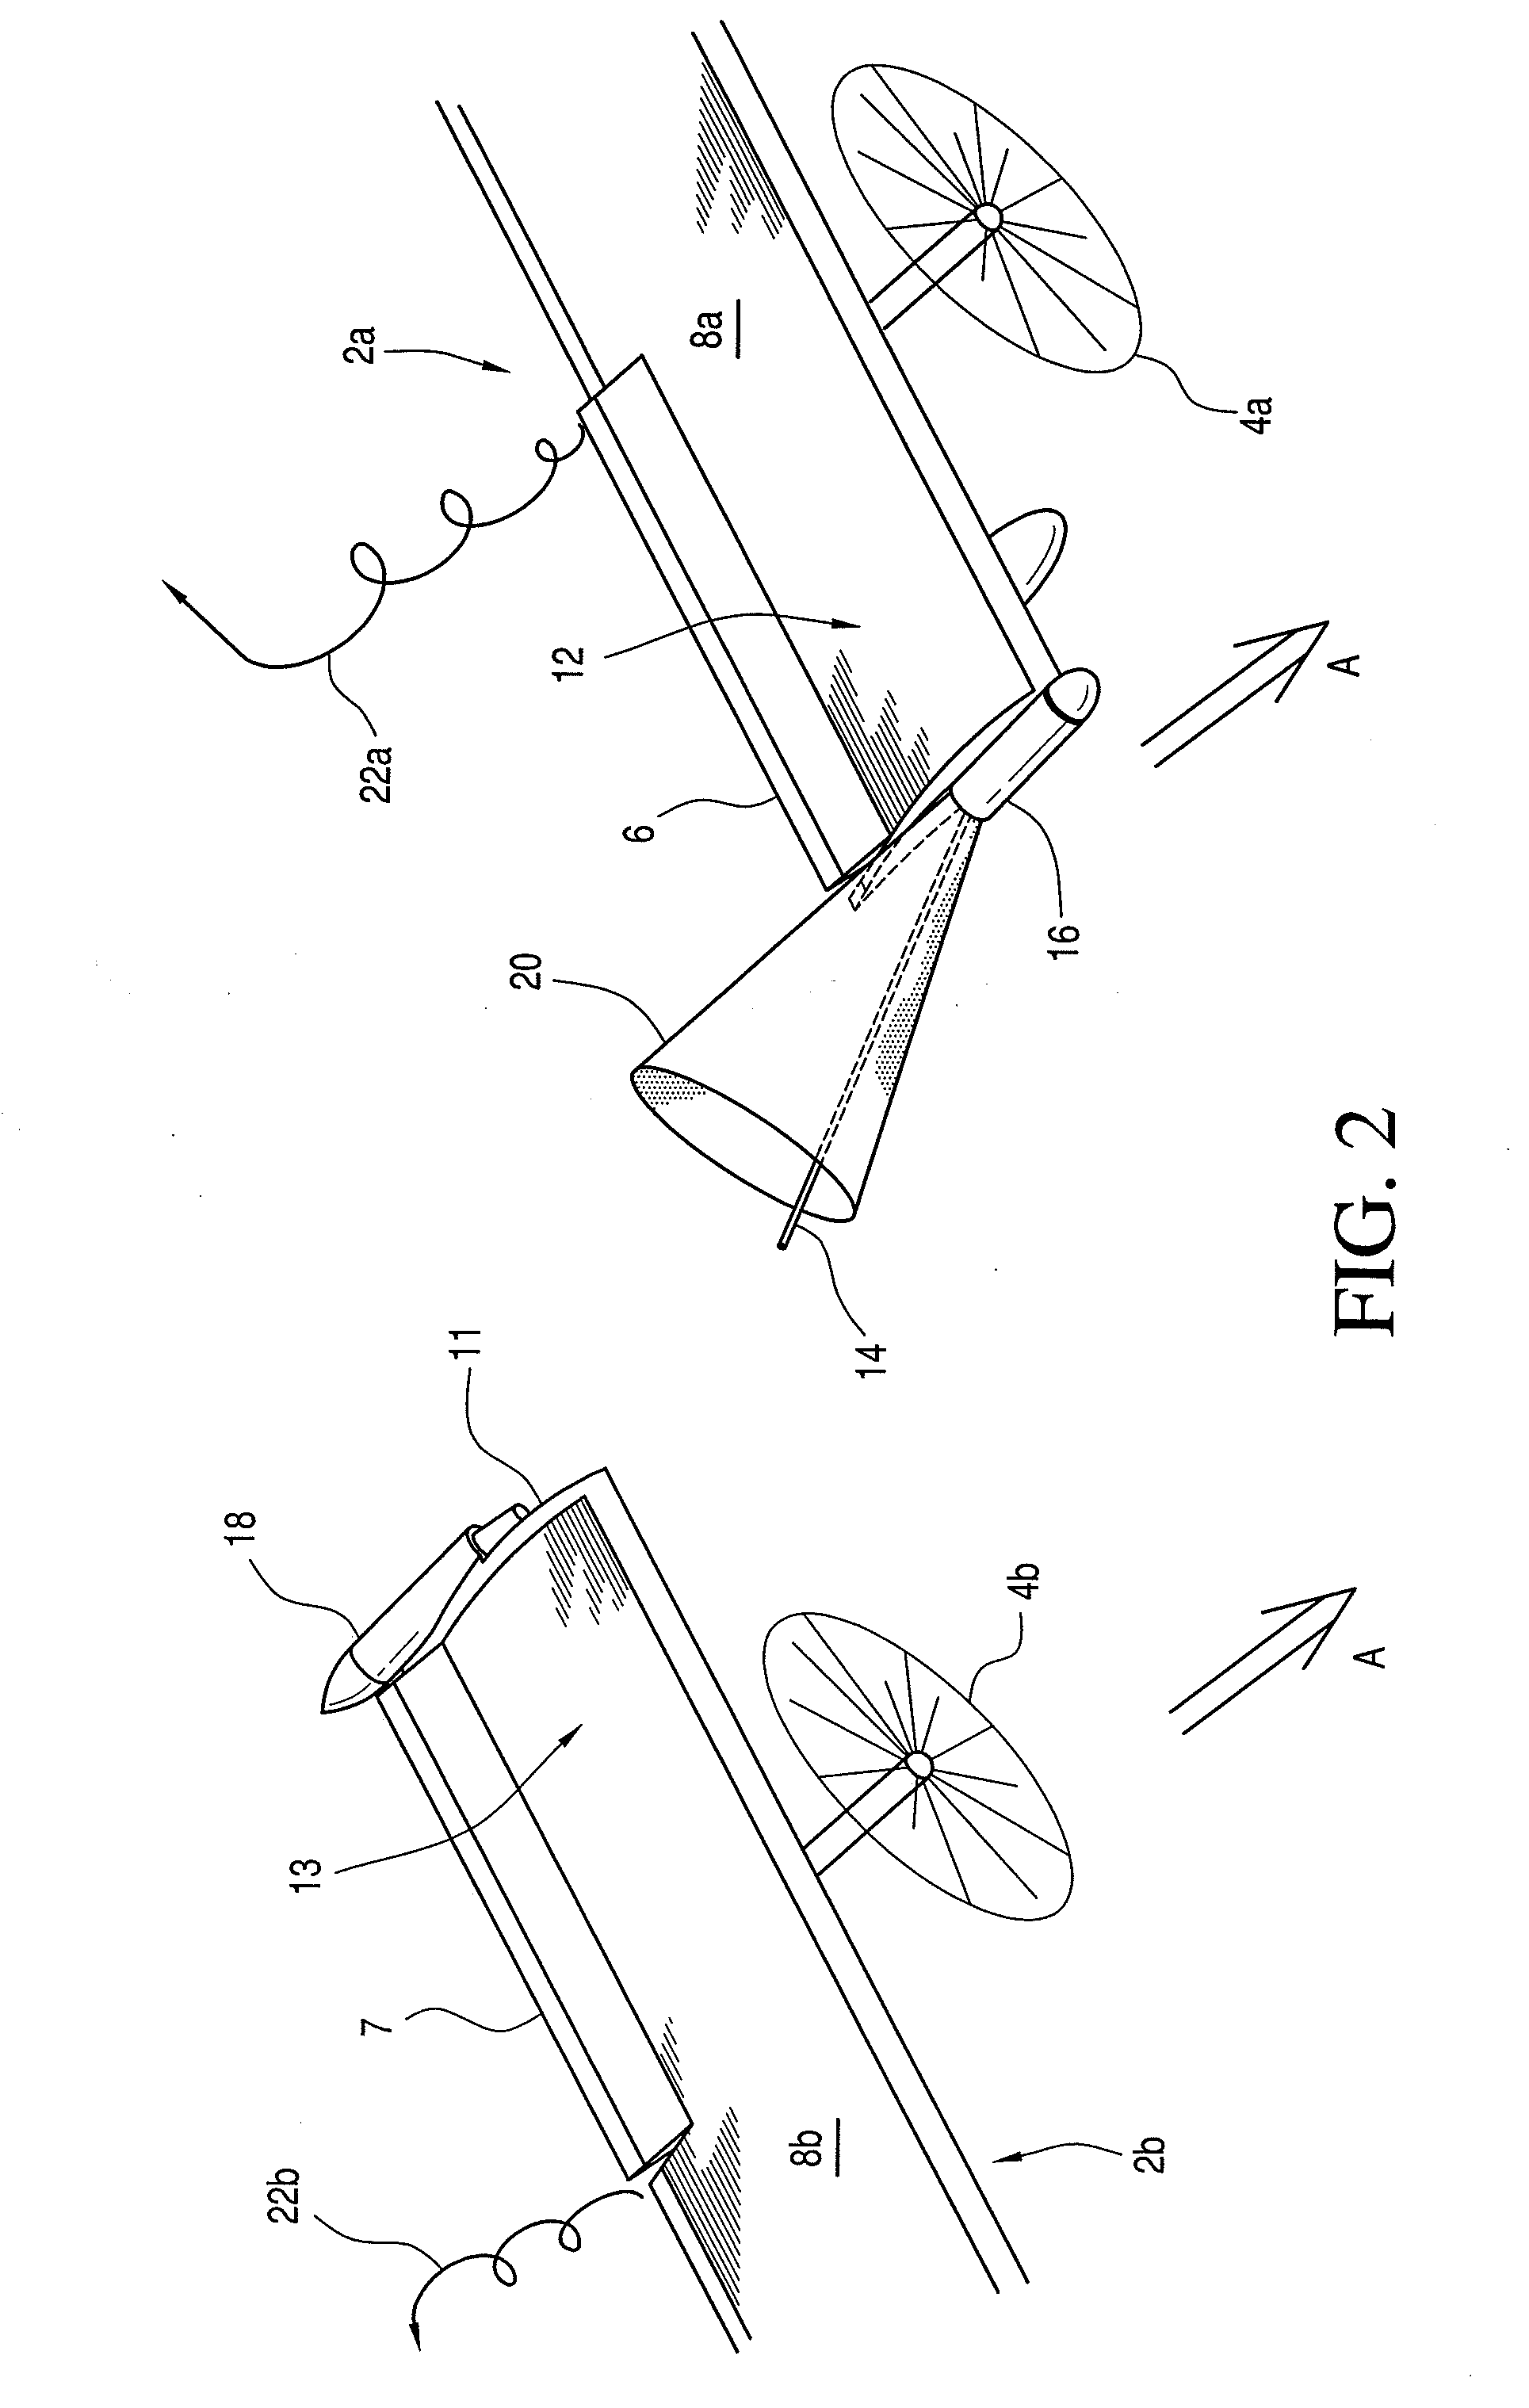 Wing tip docking system for aircraft